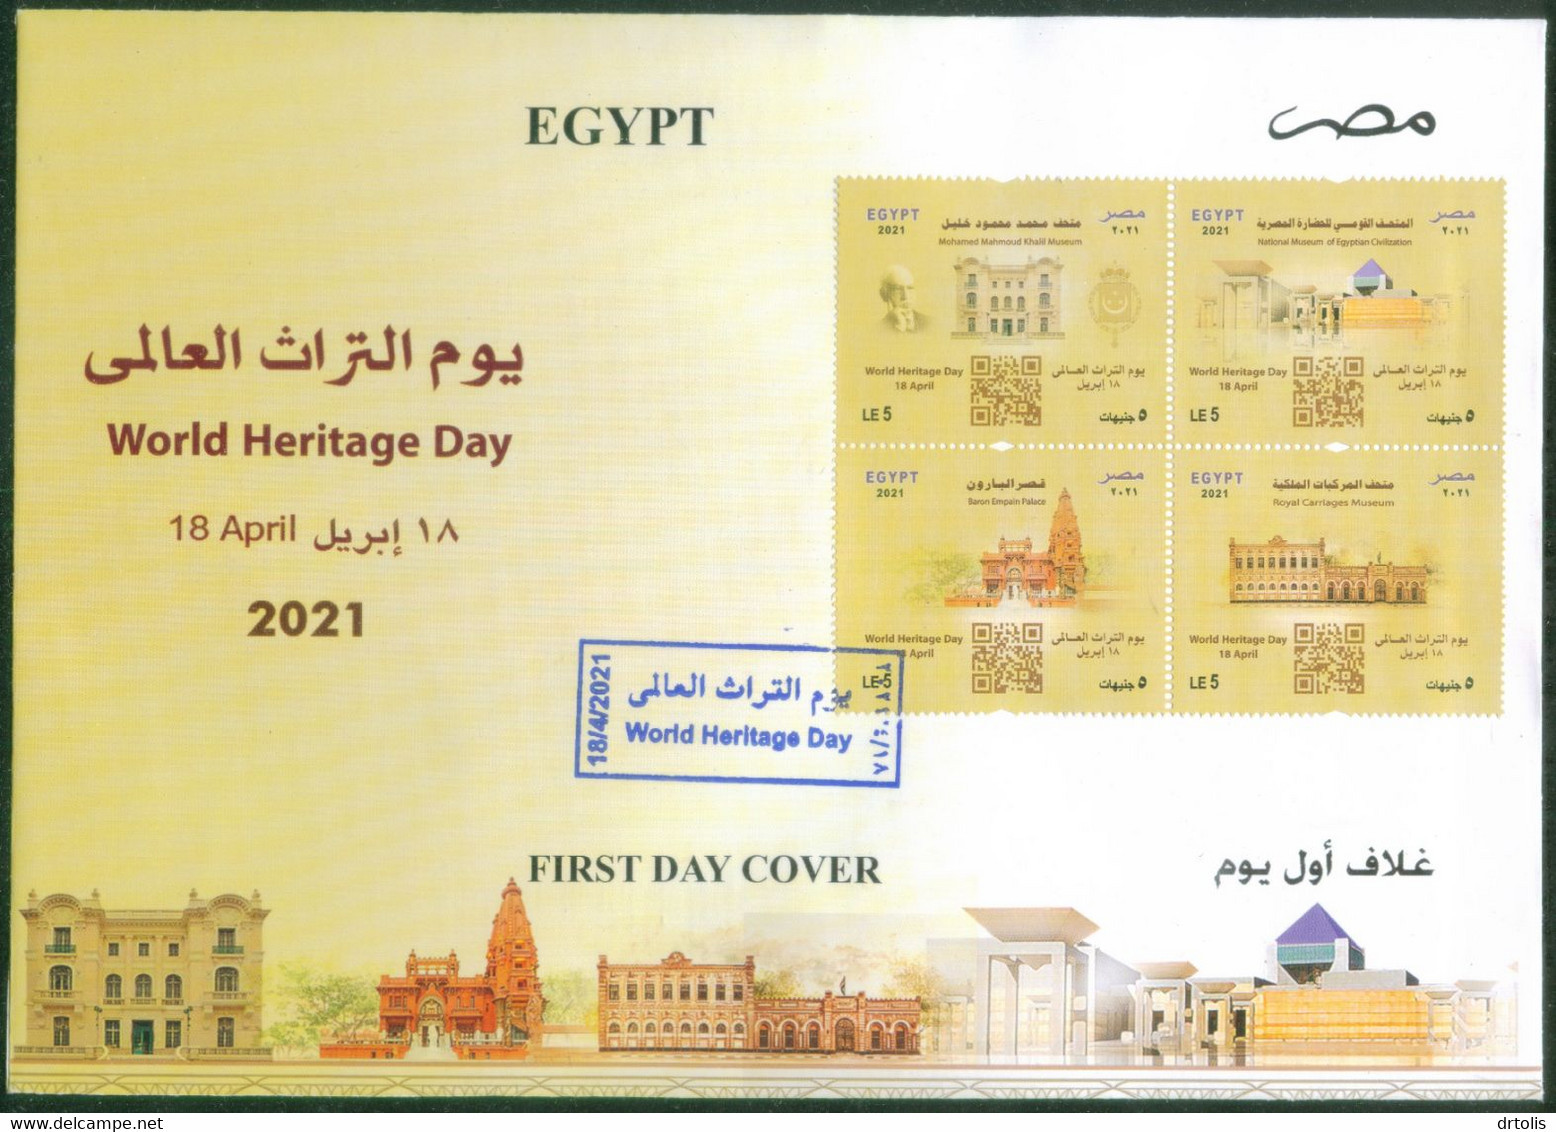 EGYPT / 2021 / BELGIUM / BARON EMPAIN PALACE / UN / WORLD HERITAGE DAY / ARCHEOLOGY / FDC - Lettres & Documents